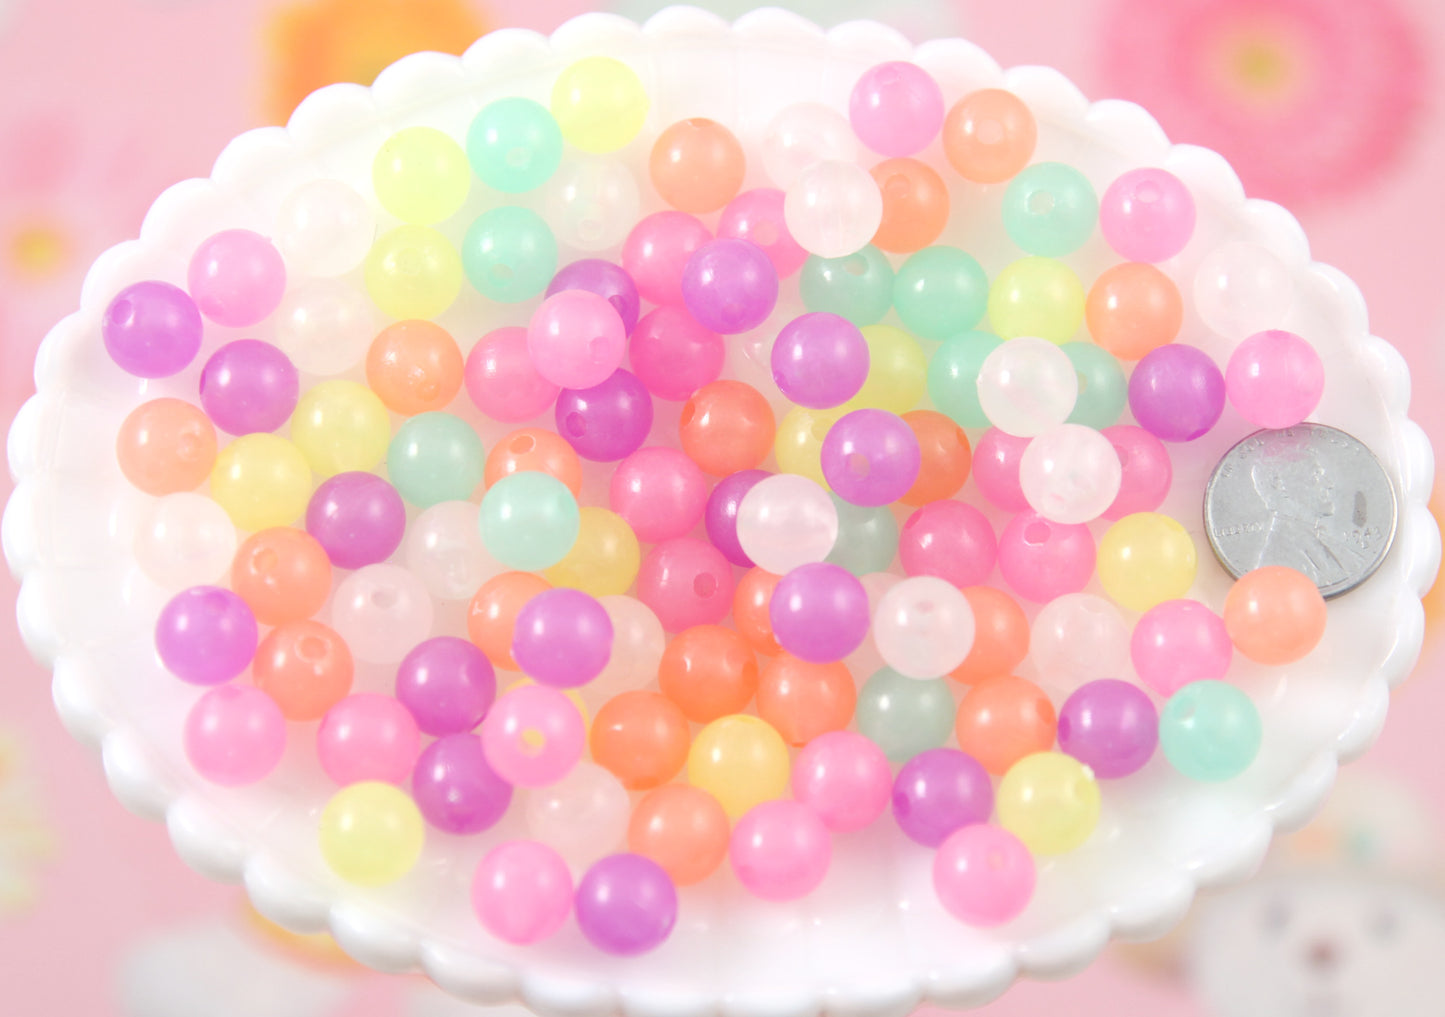 Glow in the Dark Beads - 9mm Pastel Round Glow-in-the-Dark Plastic or Acrylic Beads - 100 pc set